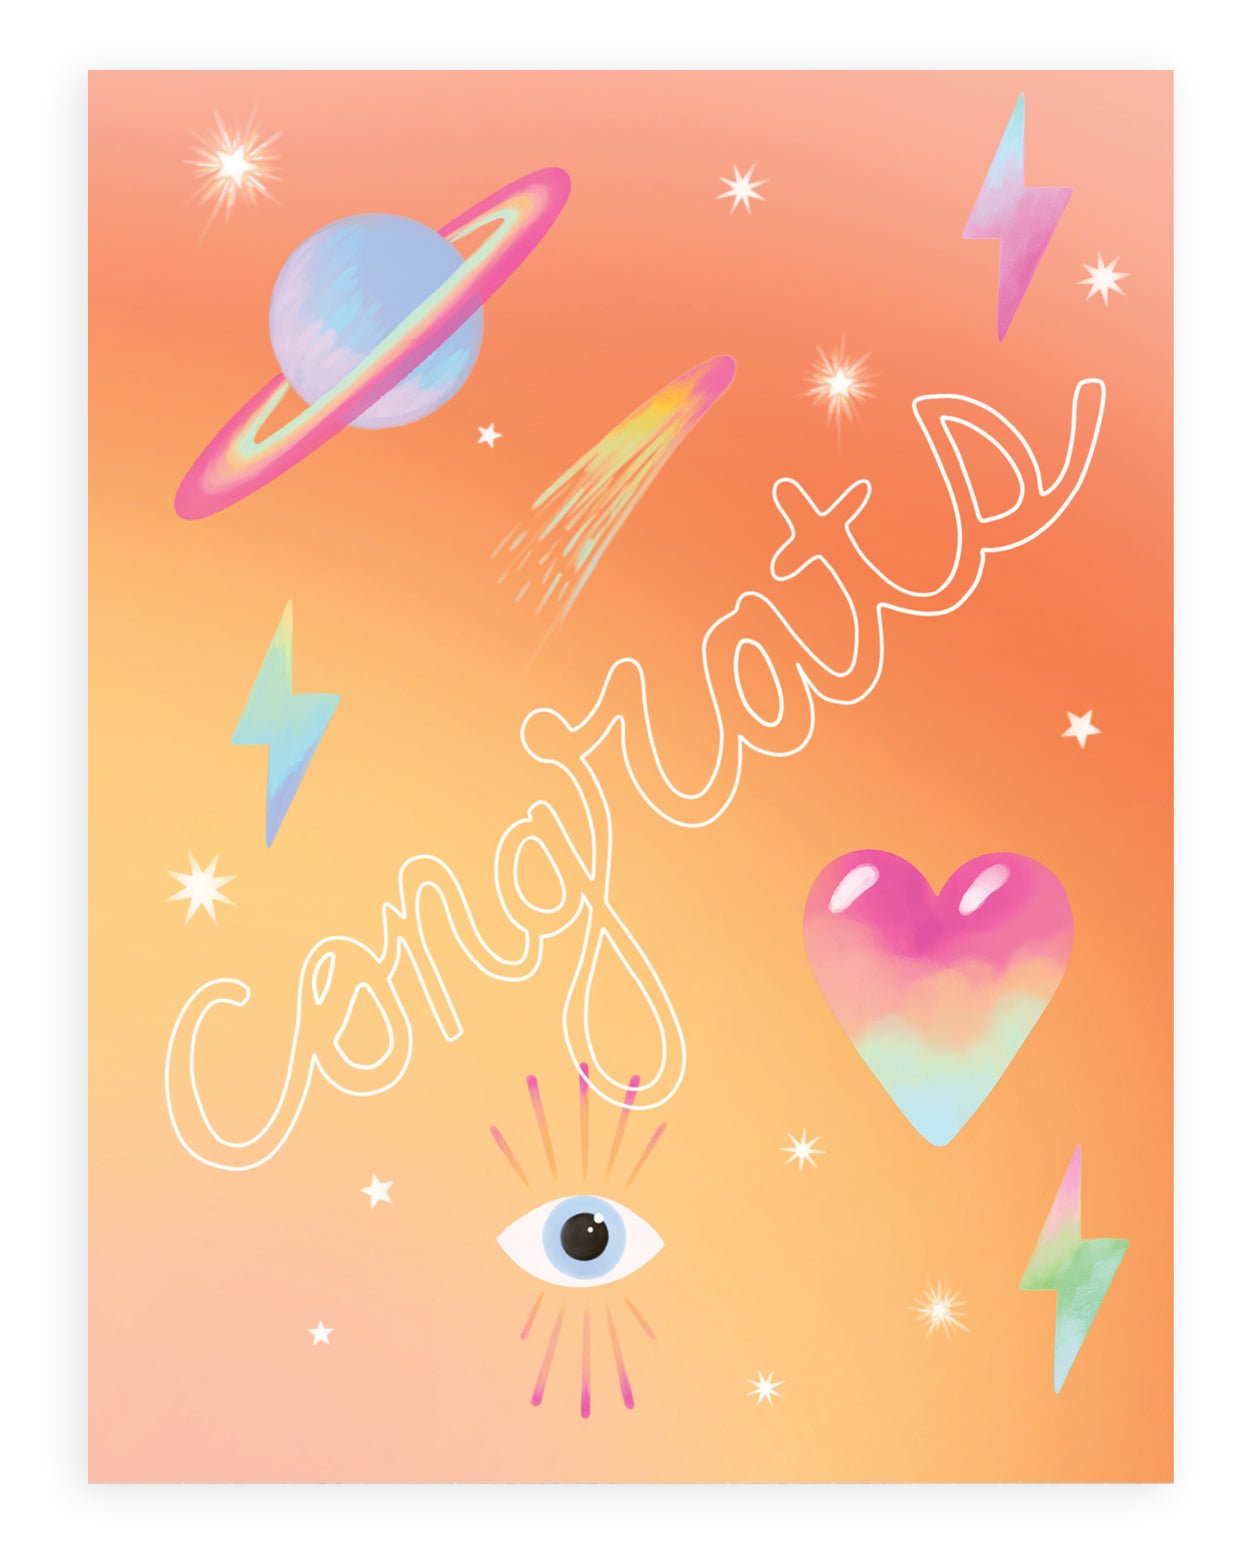 Greeting card with the word &quot;Congrats&quot; across the front in white hollow font with neon icons against an ombre orange background. Shown on a white background.